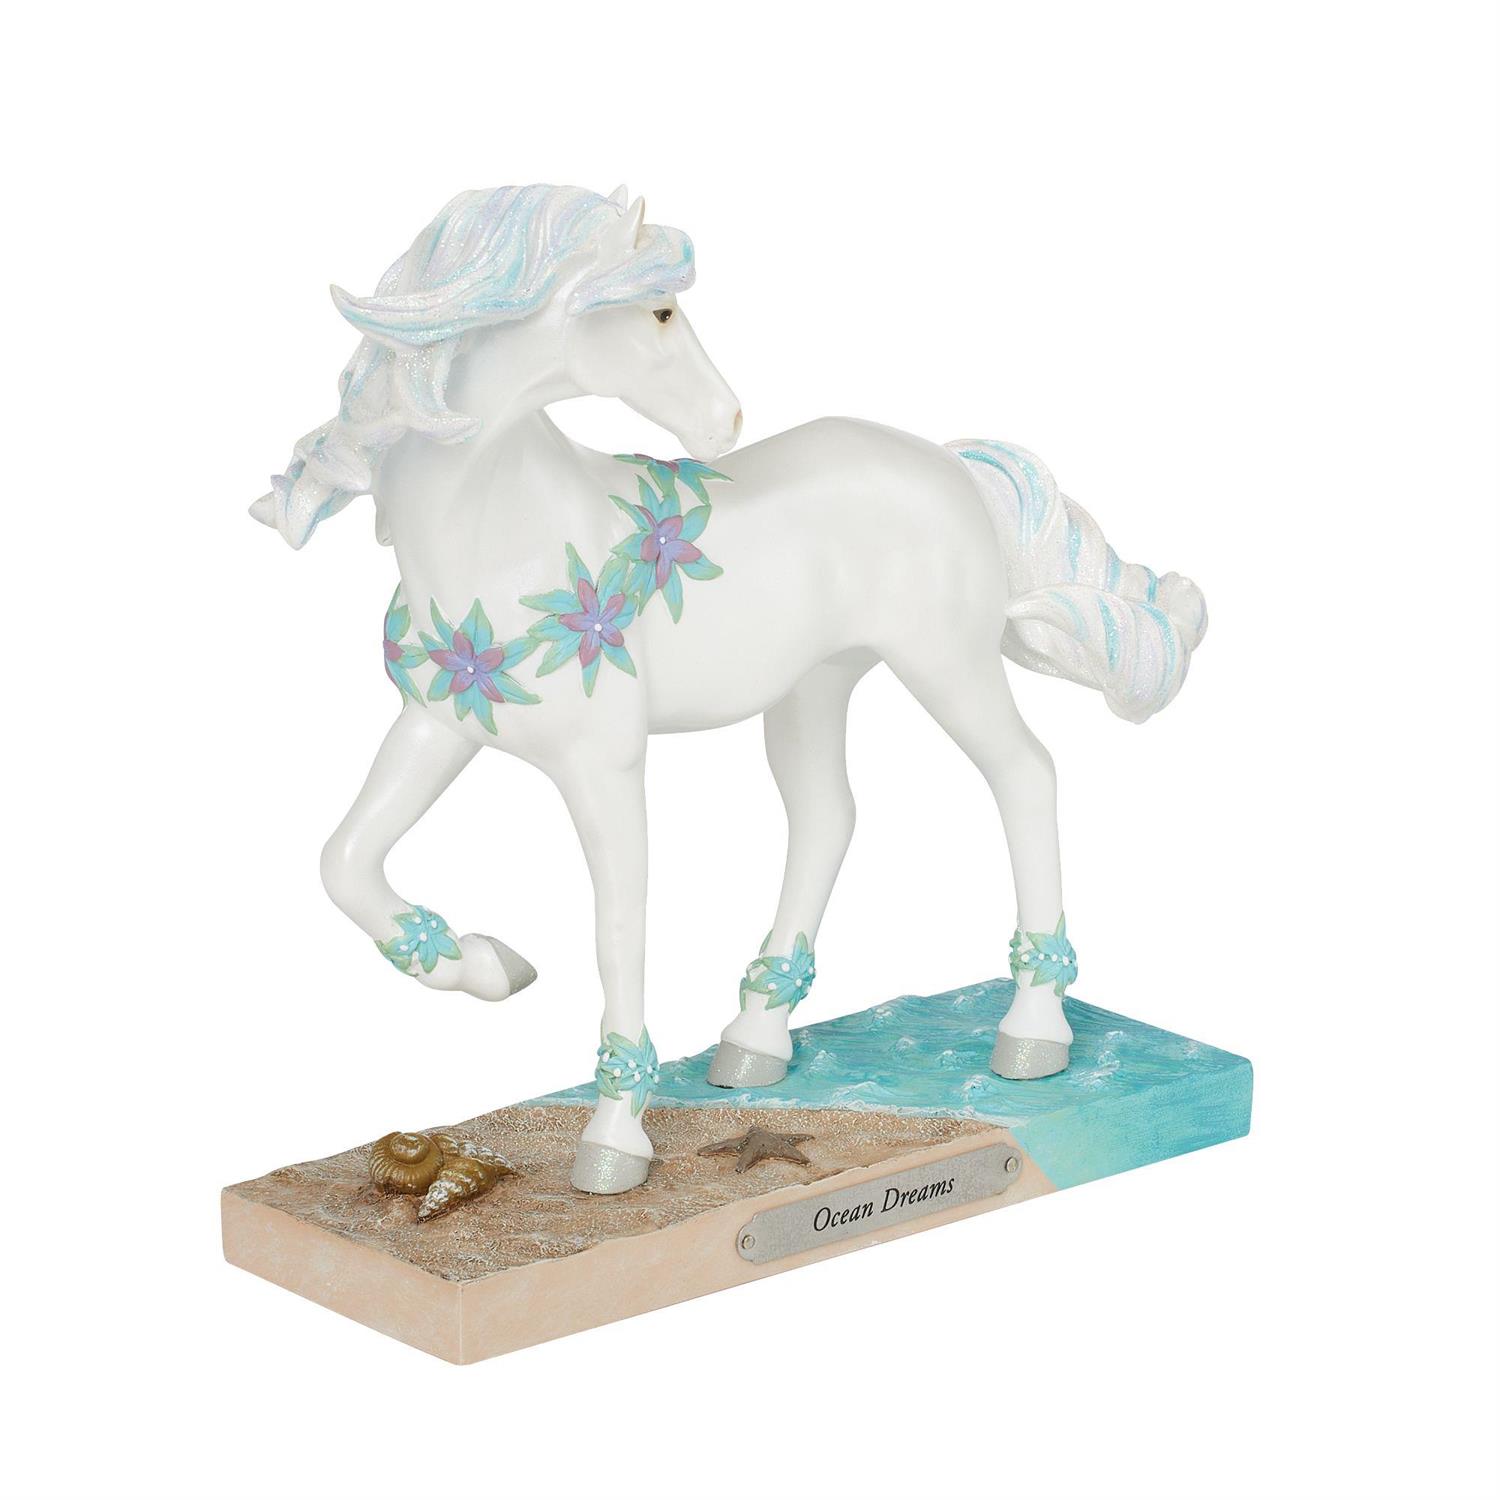 Enesco Gifts Trail Of Painted Ponies Artist Kathleen Longueil Ocean Dream Horse Figurine Free Shipping